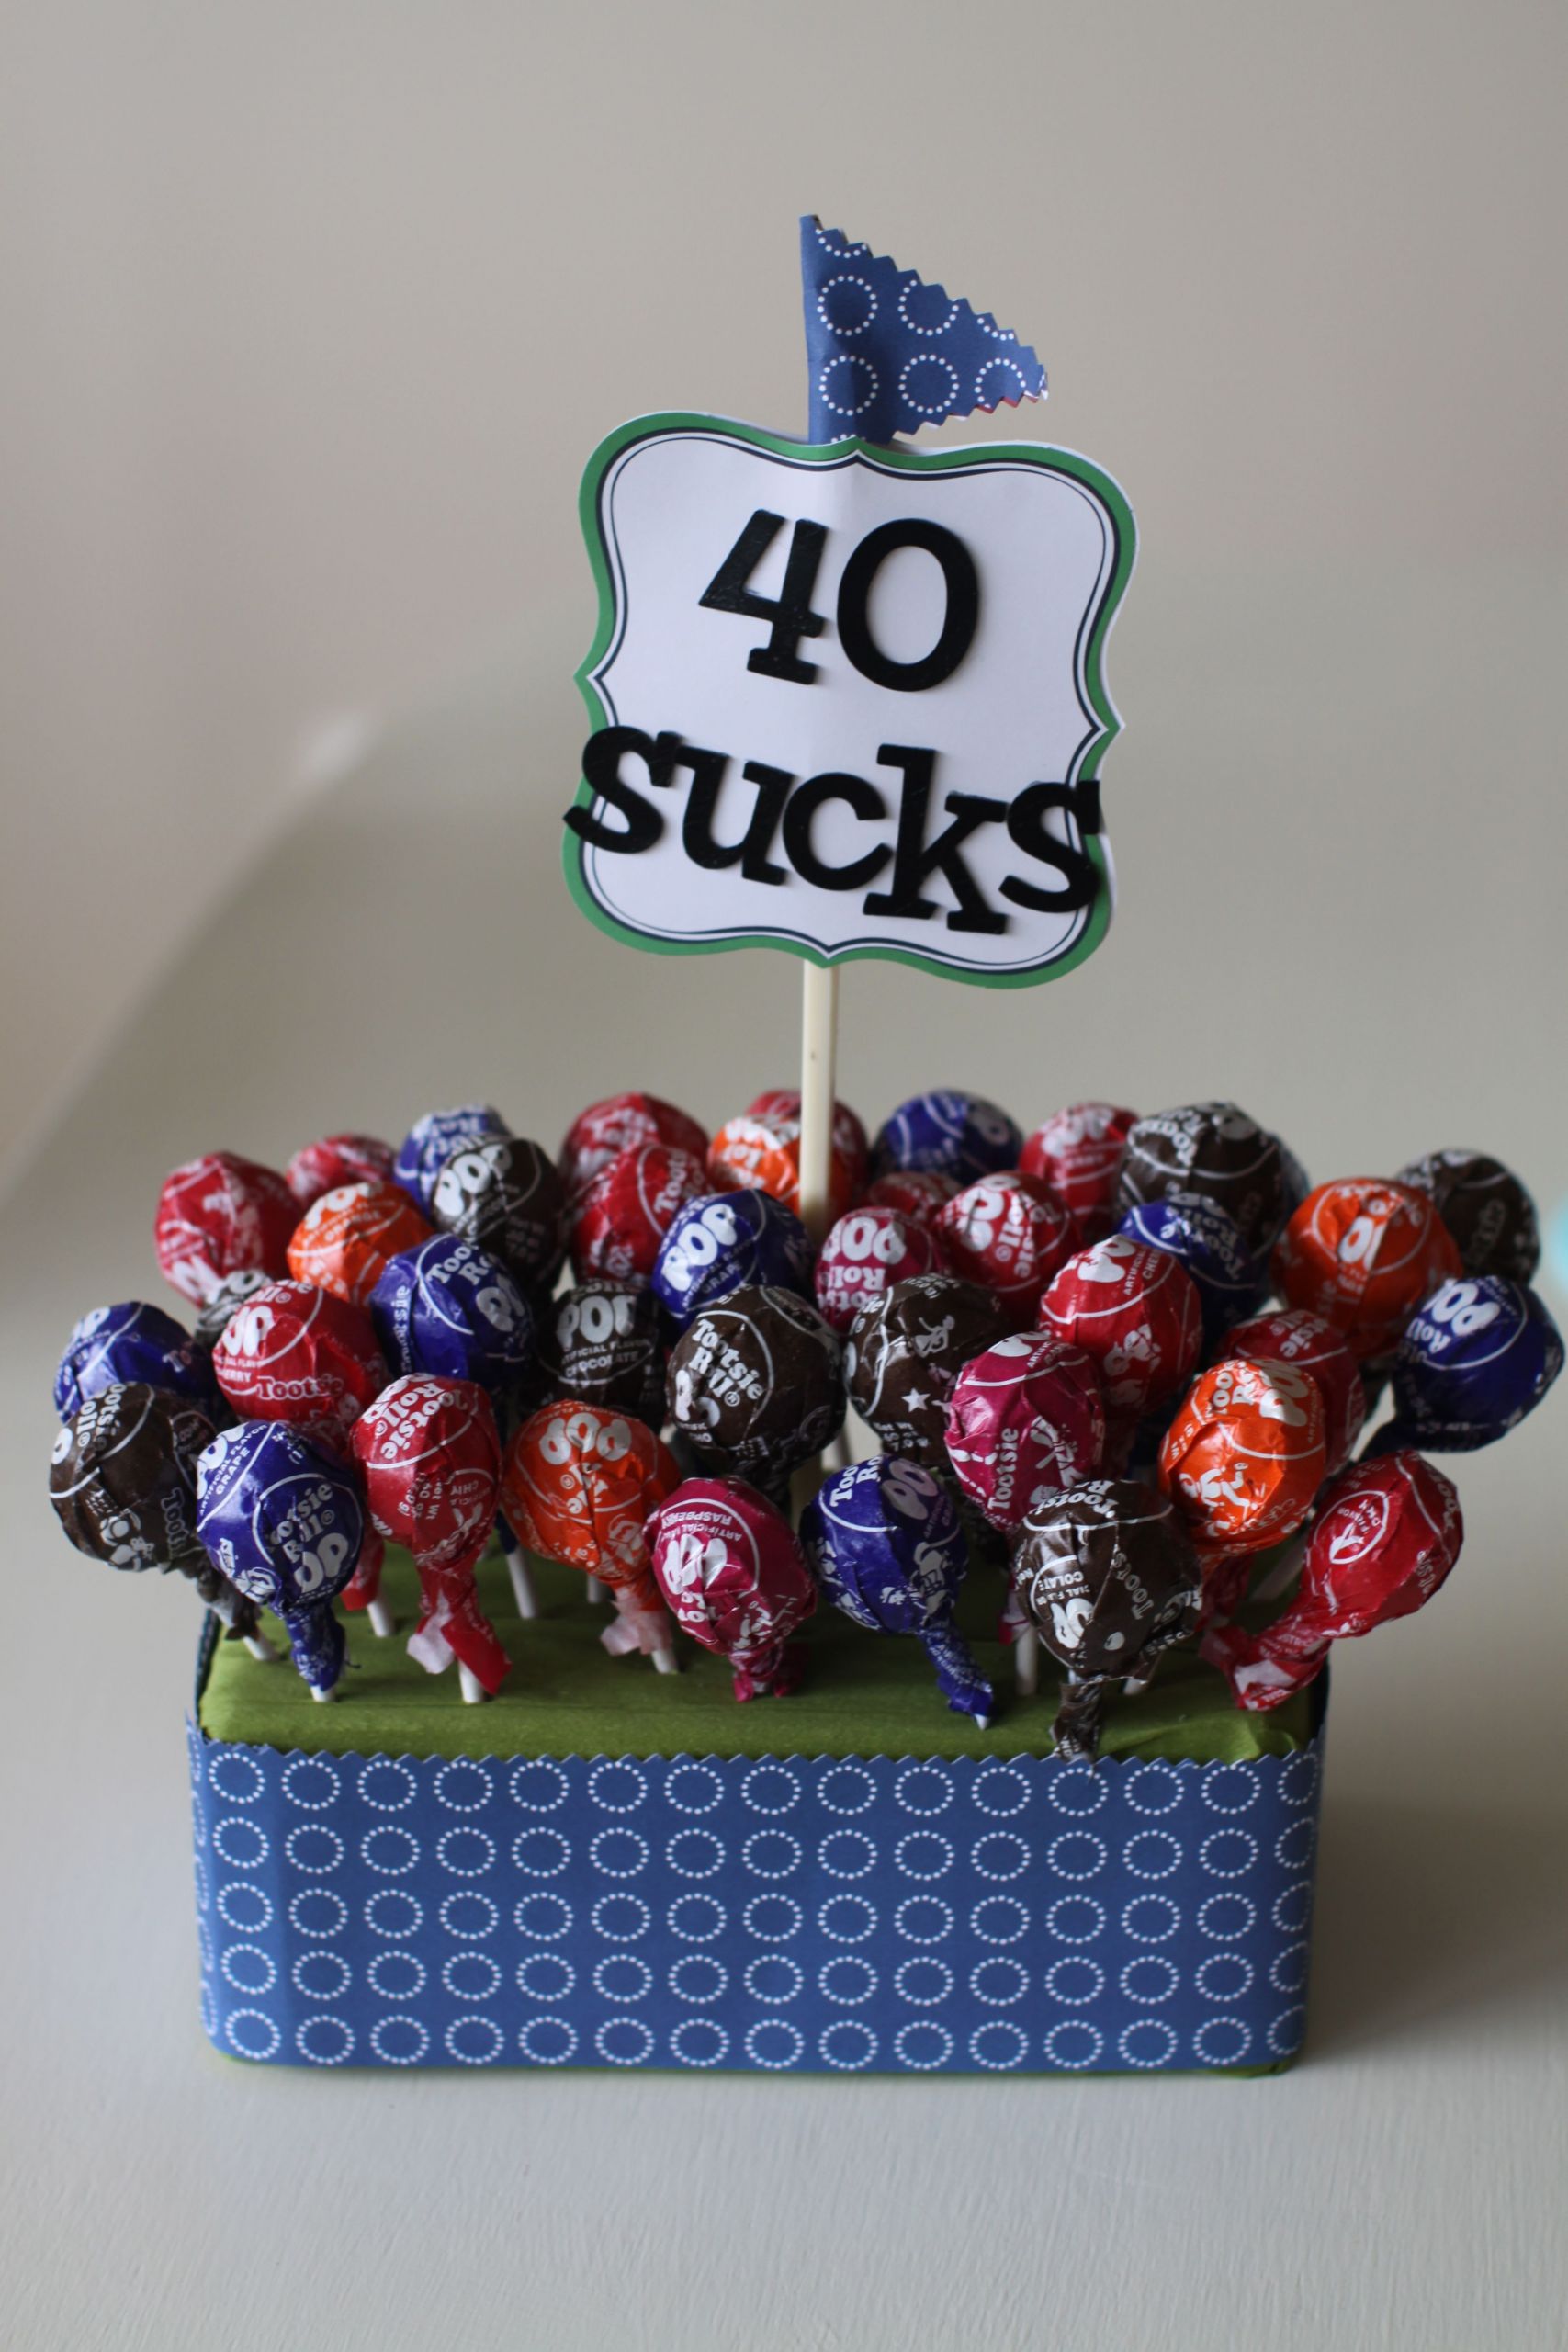 Best 40th Birthday Gifts
 Cute idea for 40th birthday t ough 40 does NOT